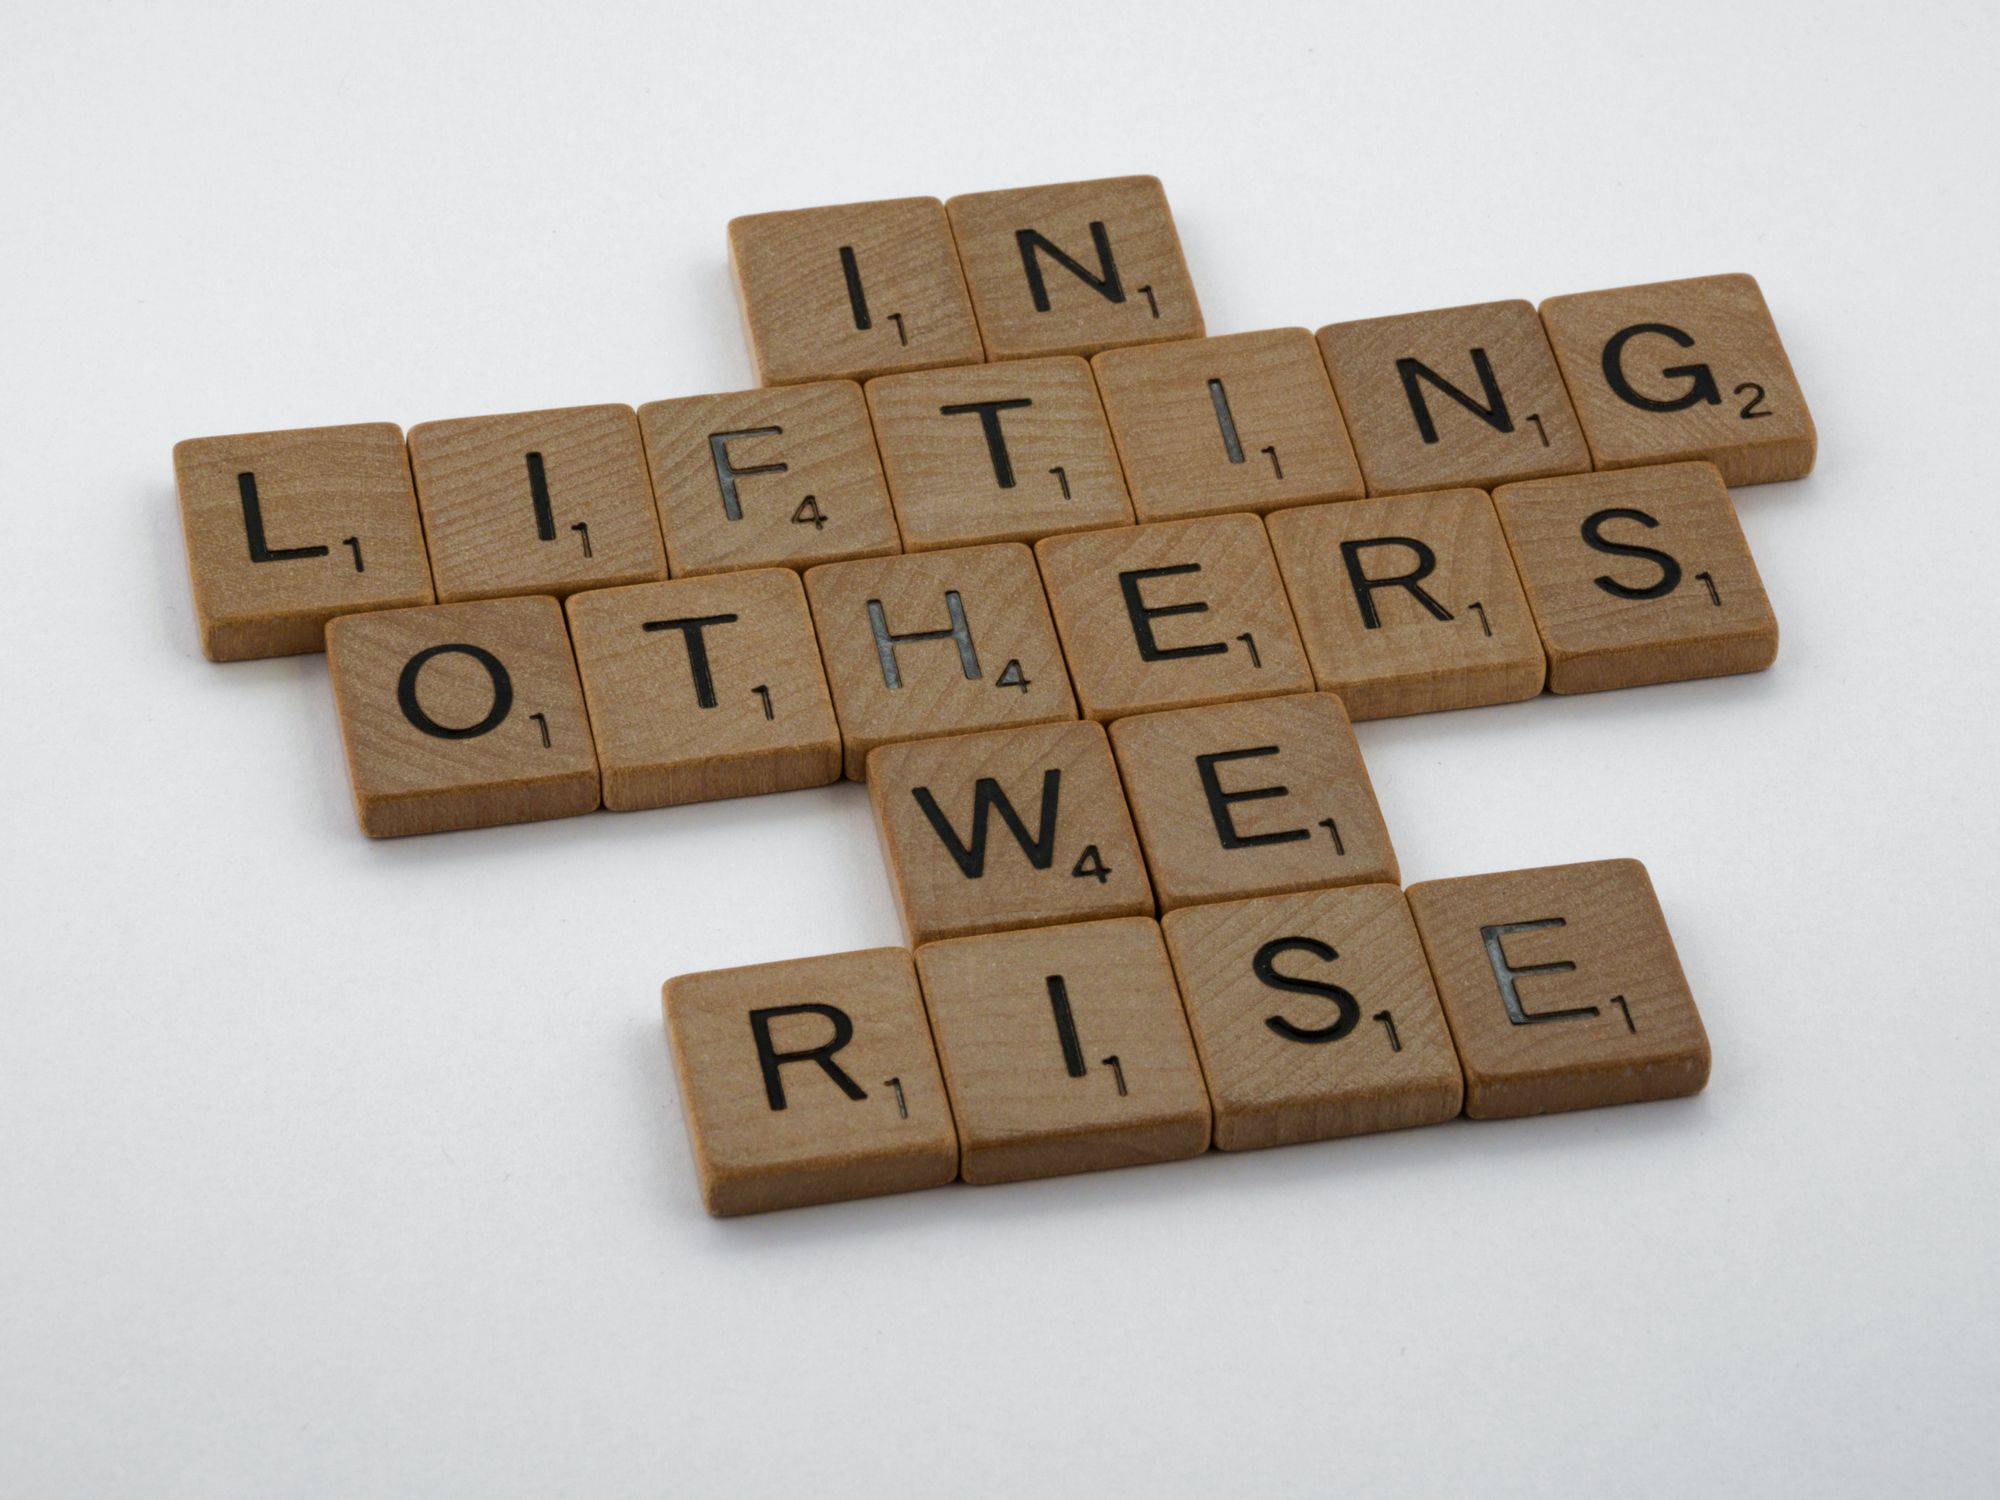 Scrabble game spelling: In Lifting Others We Rise